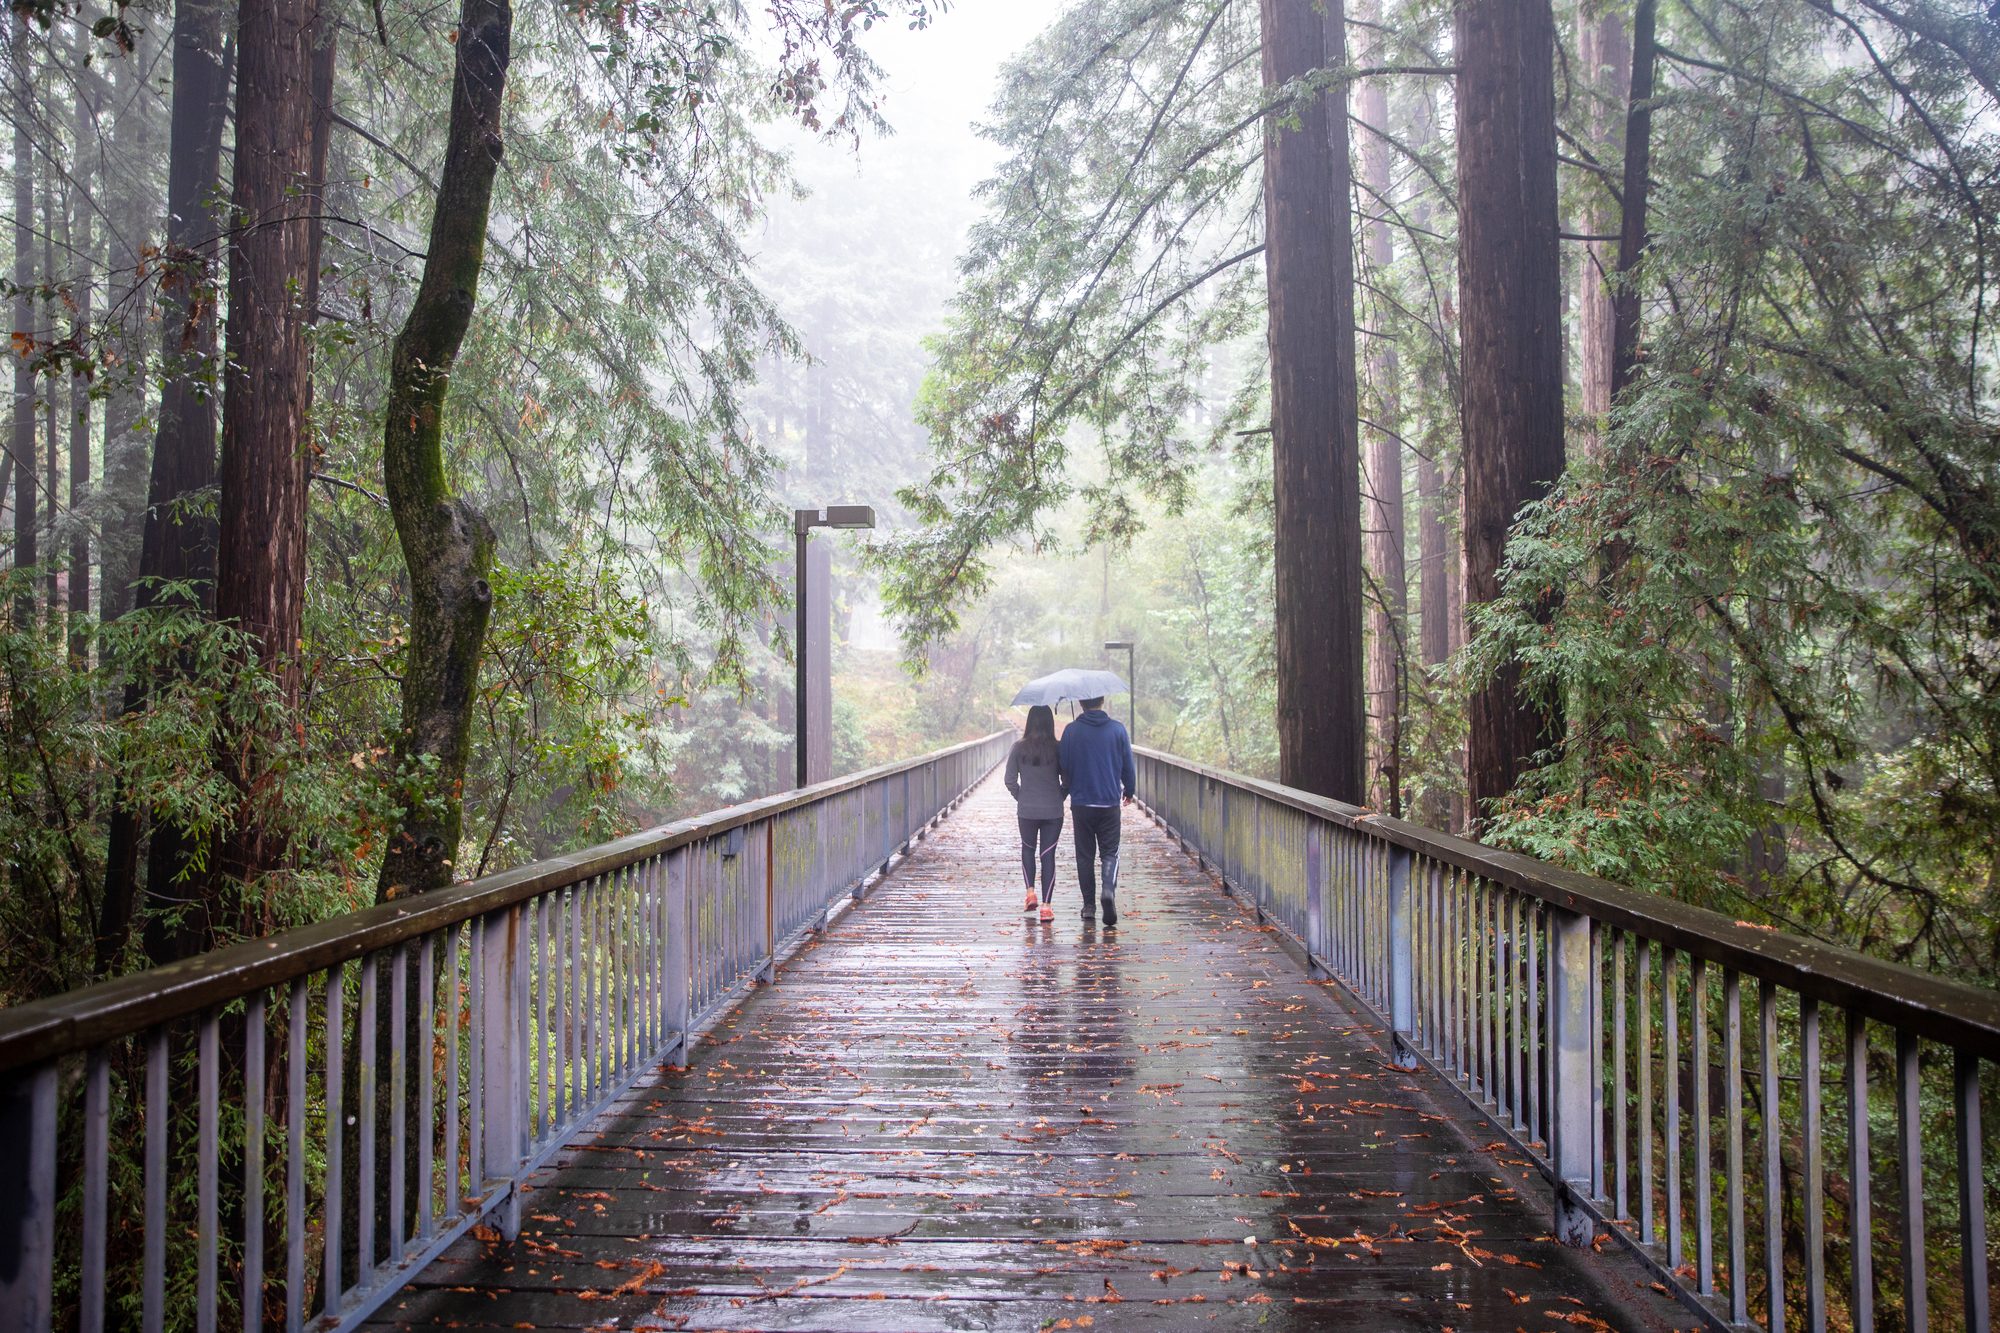 Two people walking in the rain holding and umbrella on a wooden path through the forrest.